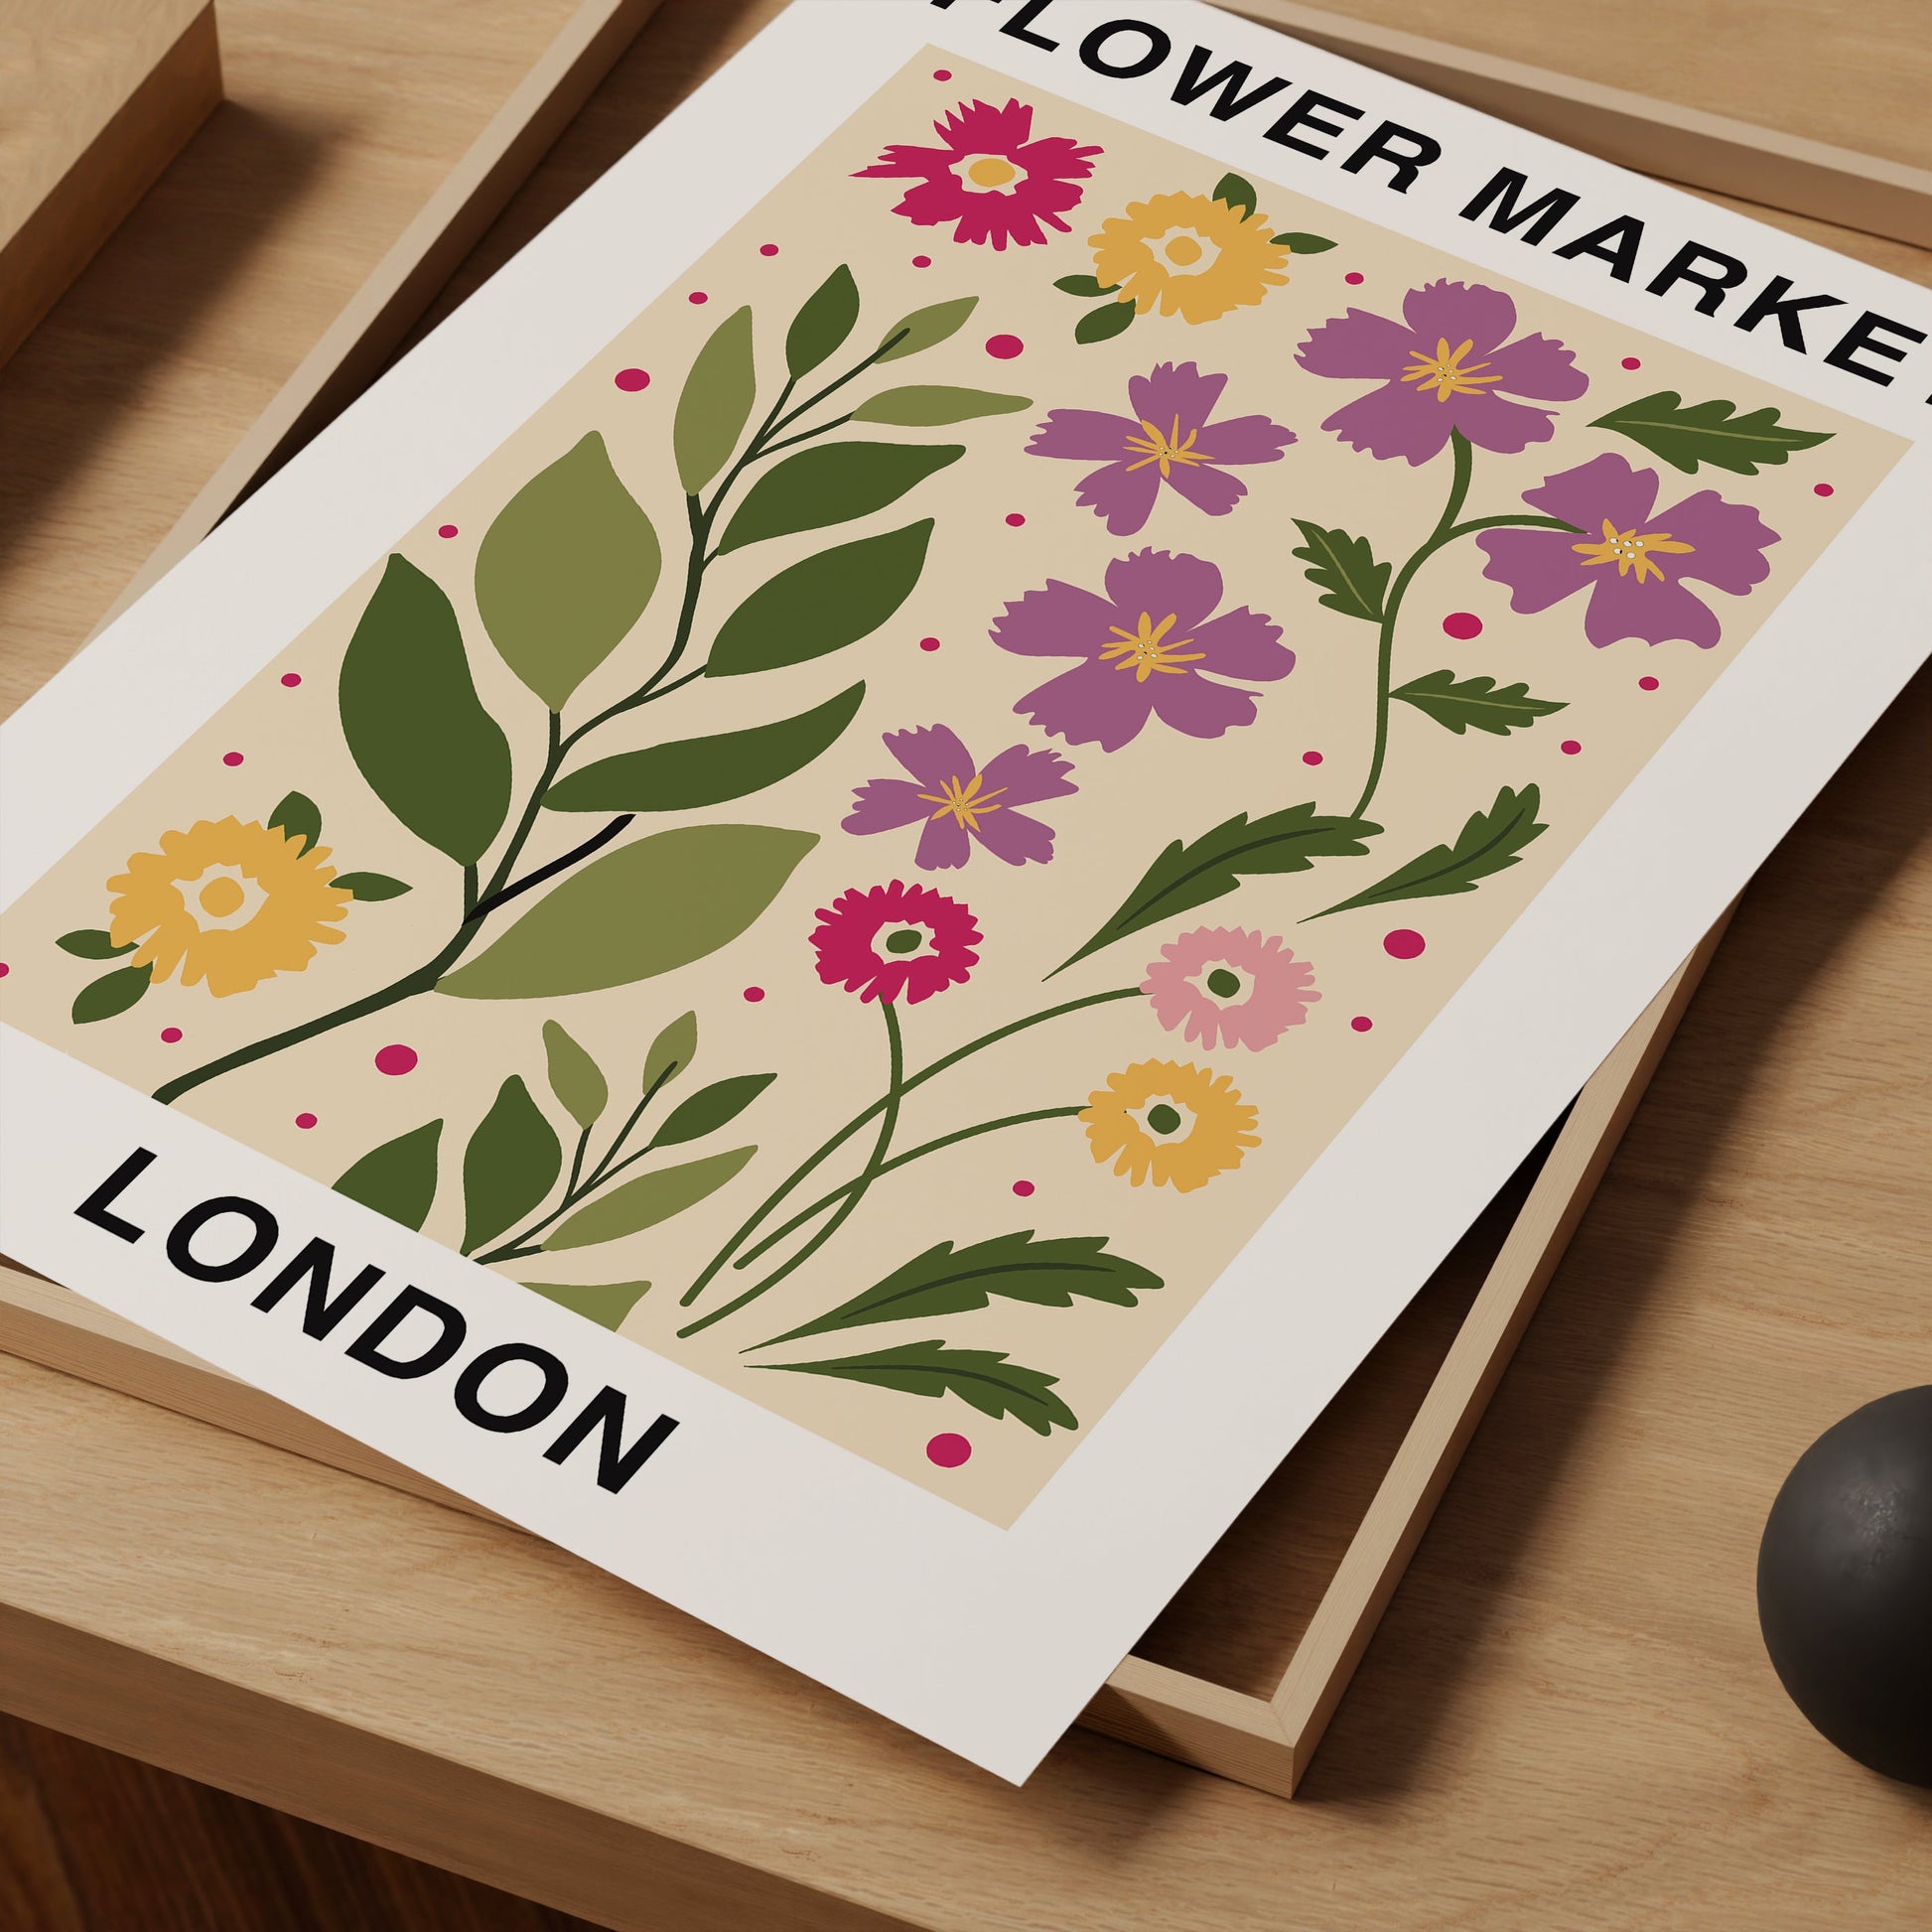 a picture of a flower make london poster on a desk